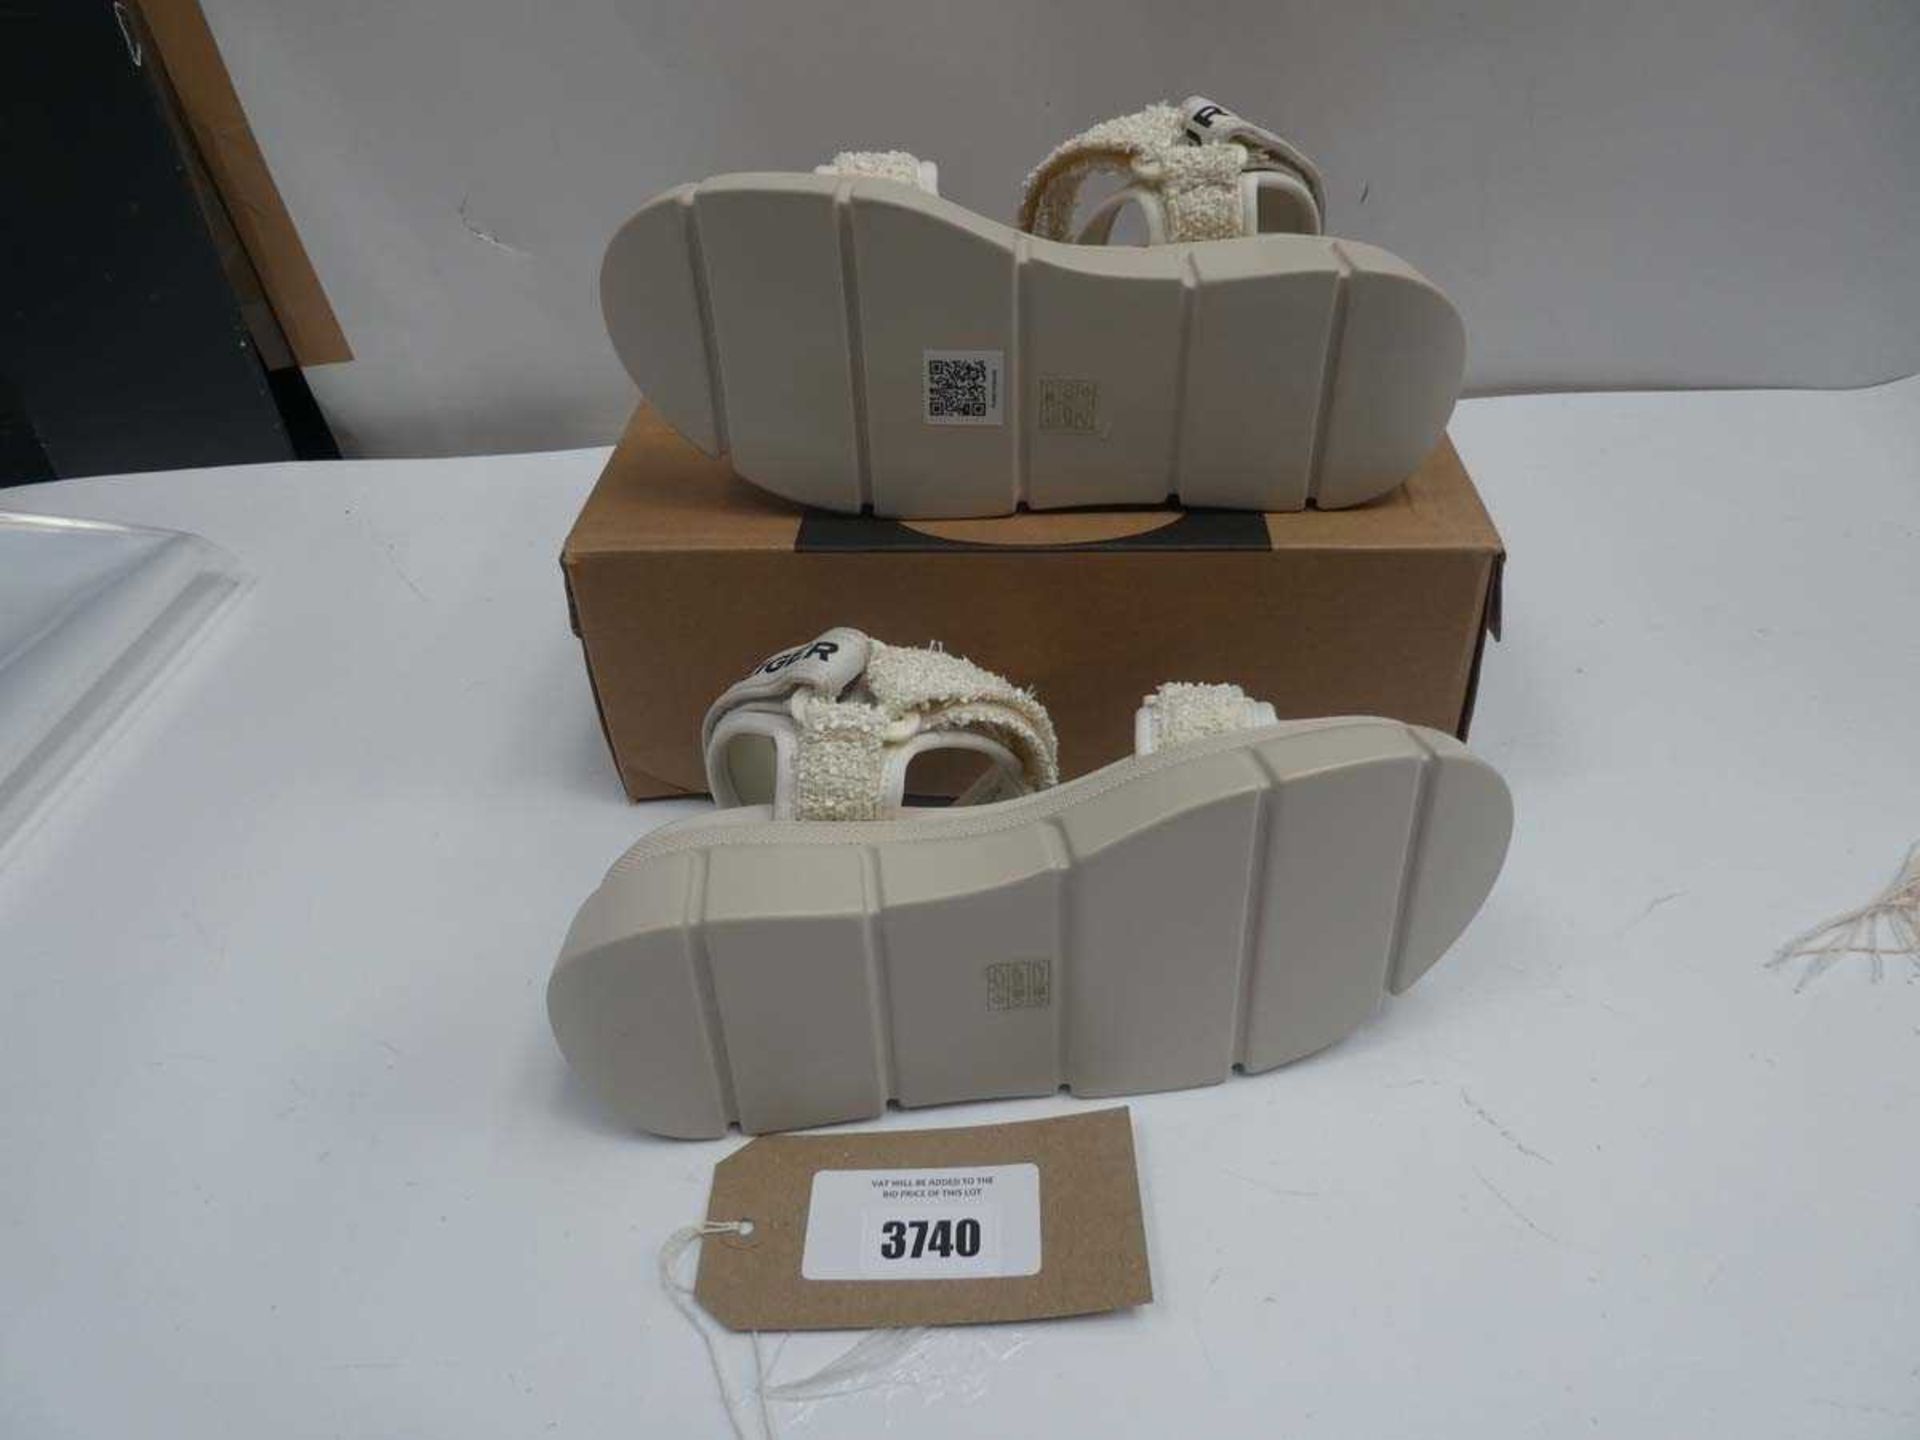 +VAT Pair of Kurt Geiger Vegan Rigged sandals in cream, size 38 (with box) - Image 2 of 2